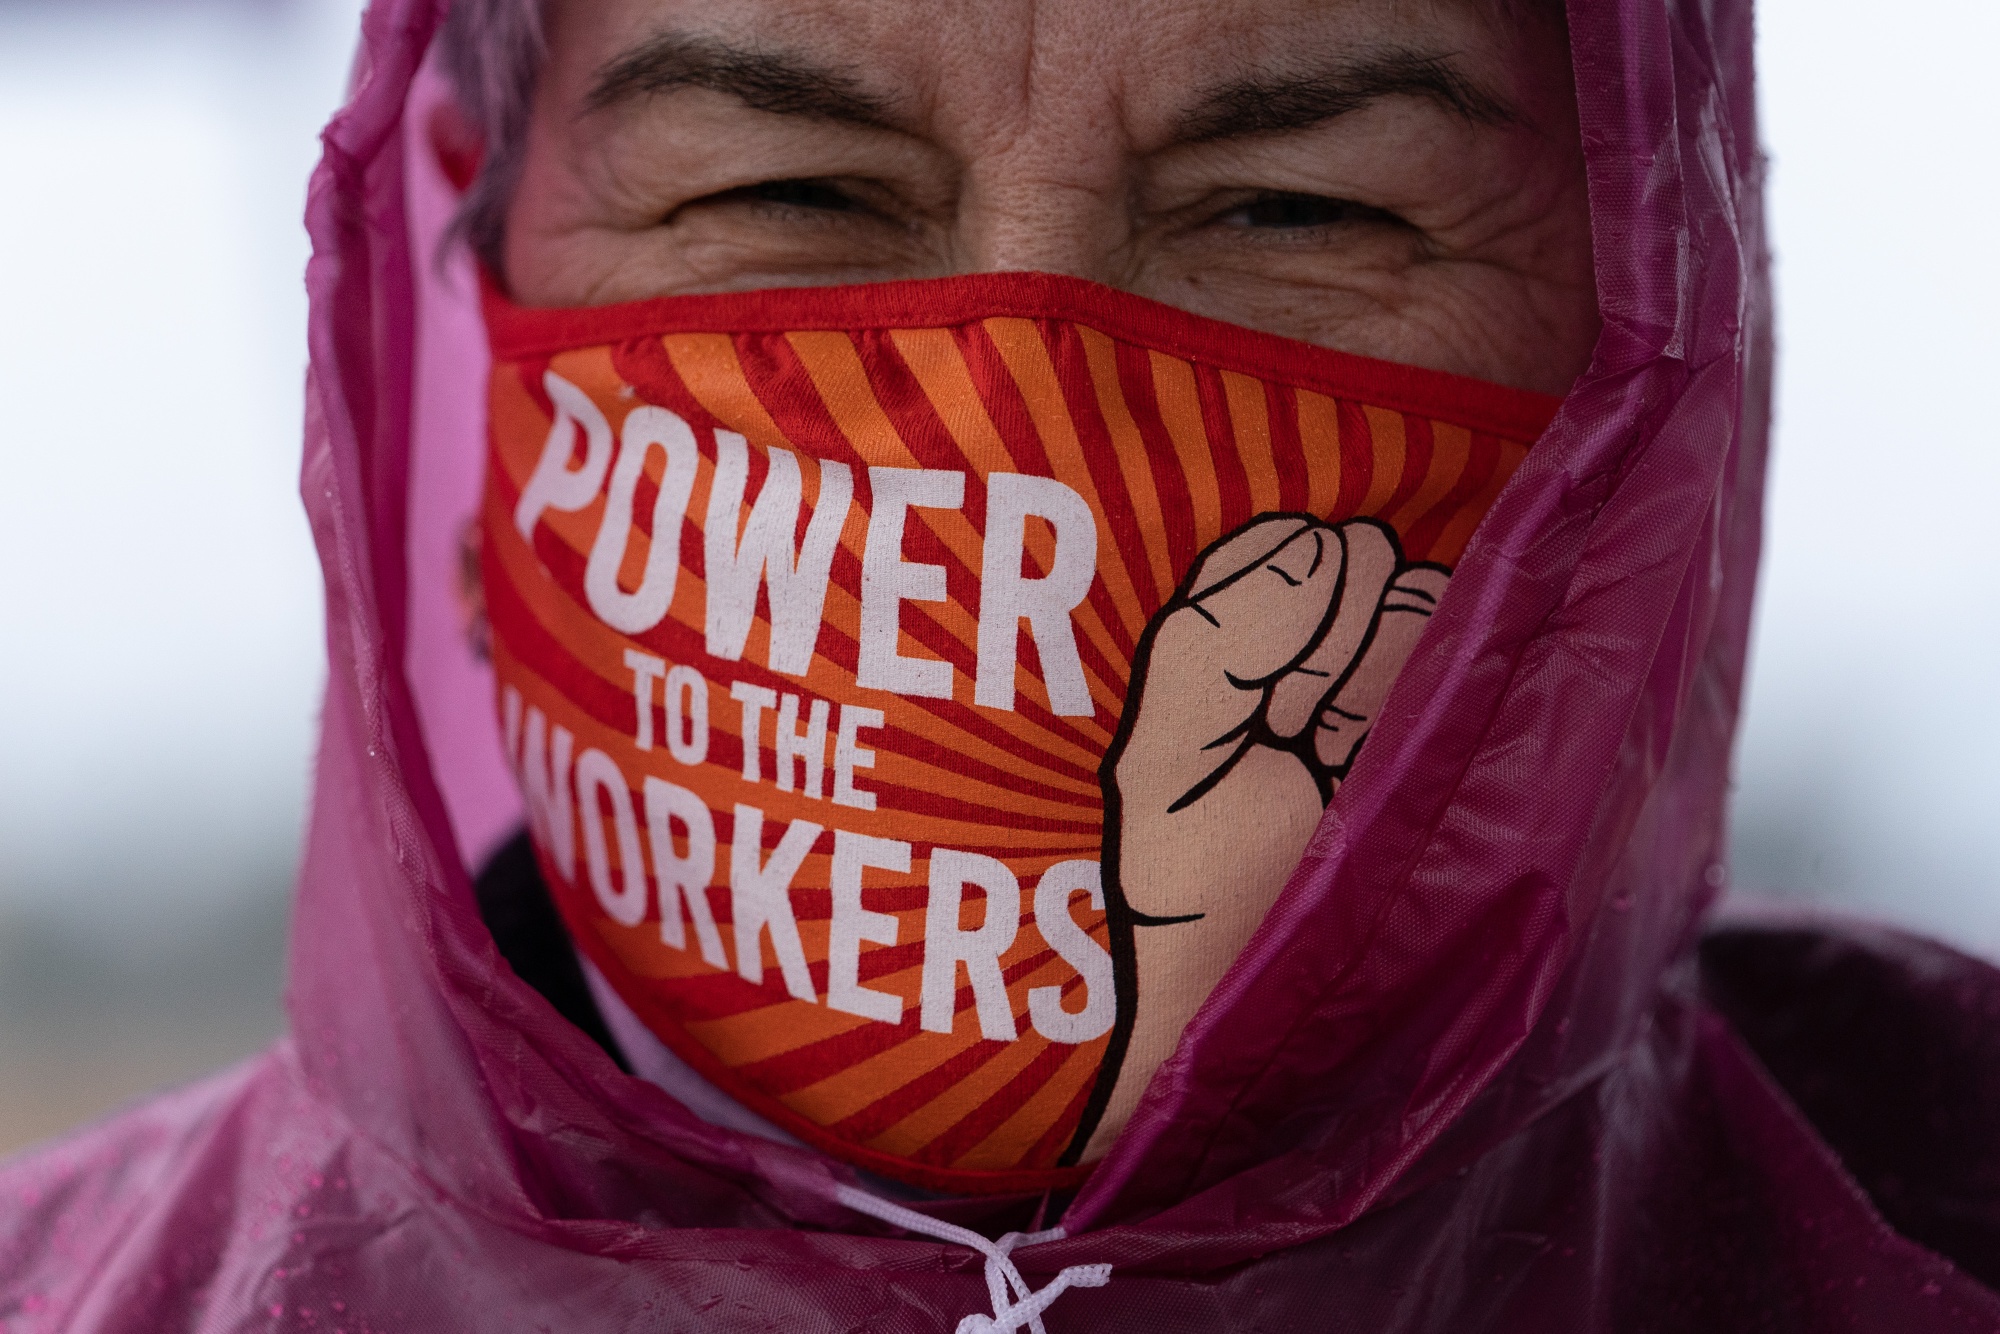 Workers and activists held a rally&nbsp;on Feb. 6 near the&nbsp;Amazon fulfillment center in Bessemer,&nbsp;Alabama, where a union drive has drawn national attention.